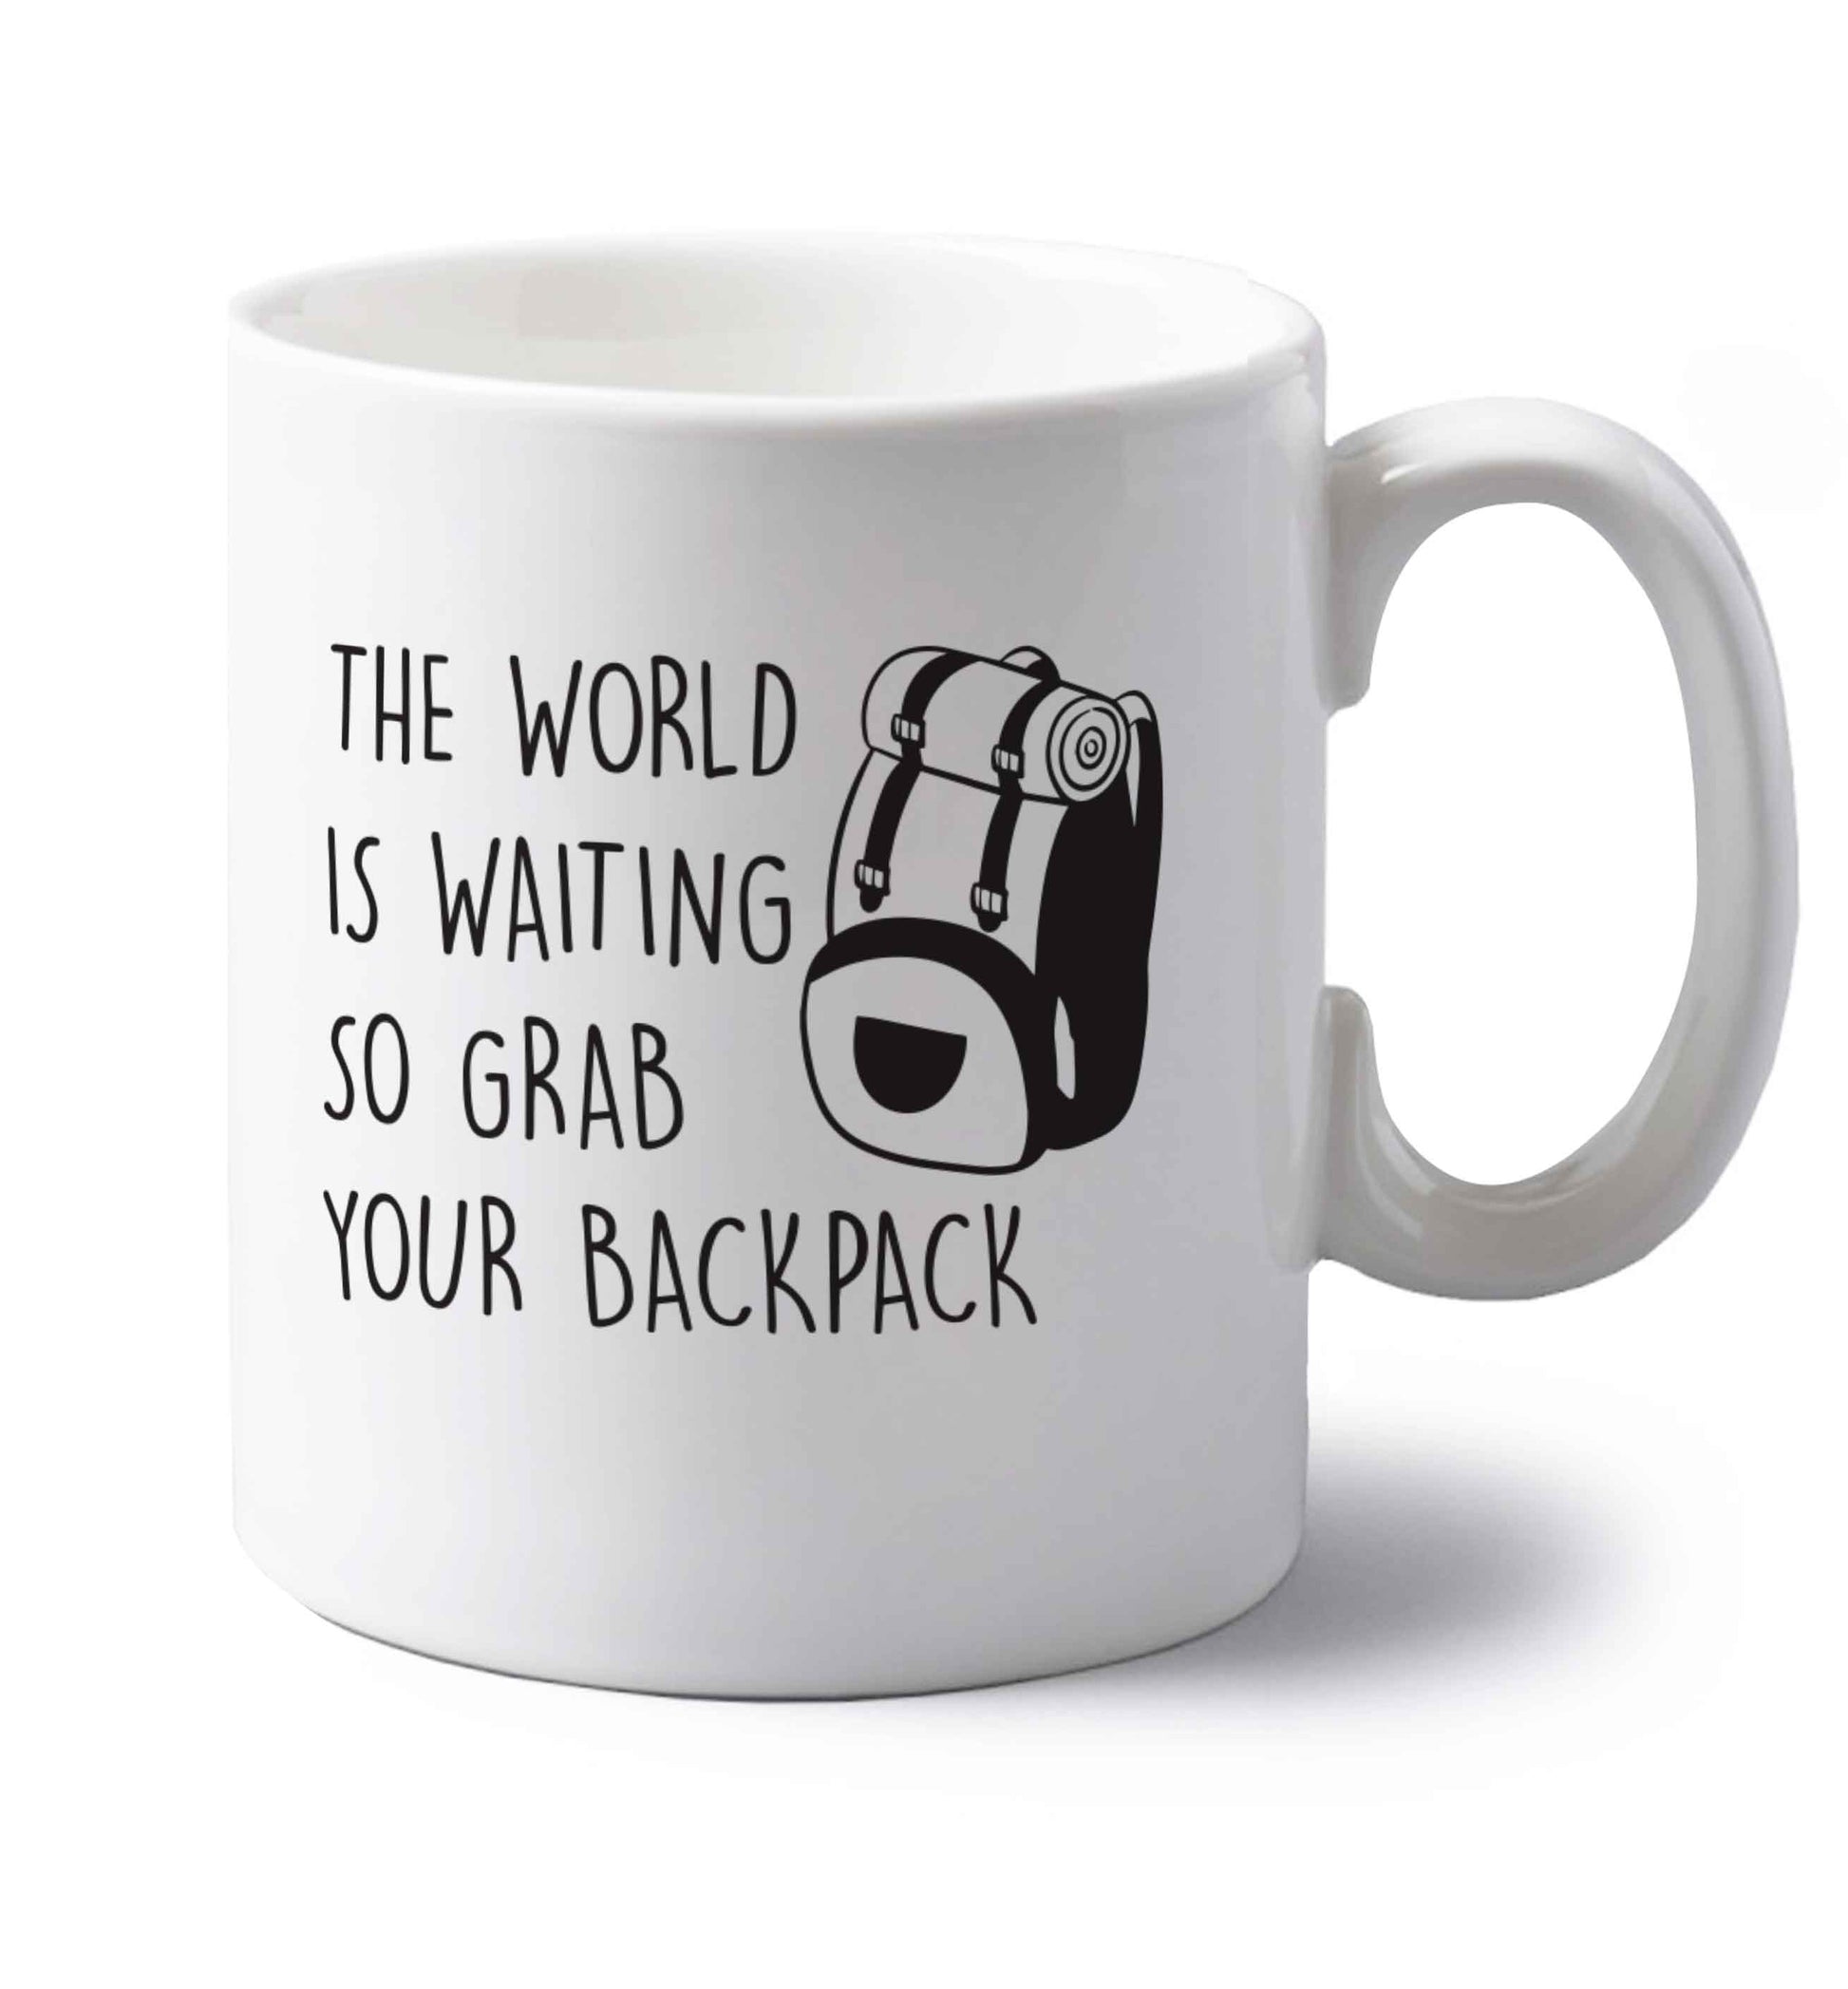 The world is waiting so grab your backpack left handed white ceramic mug 